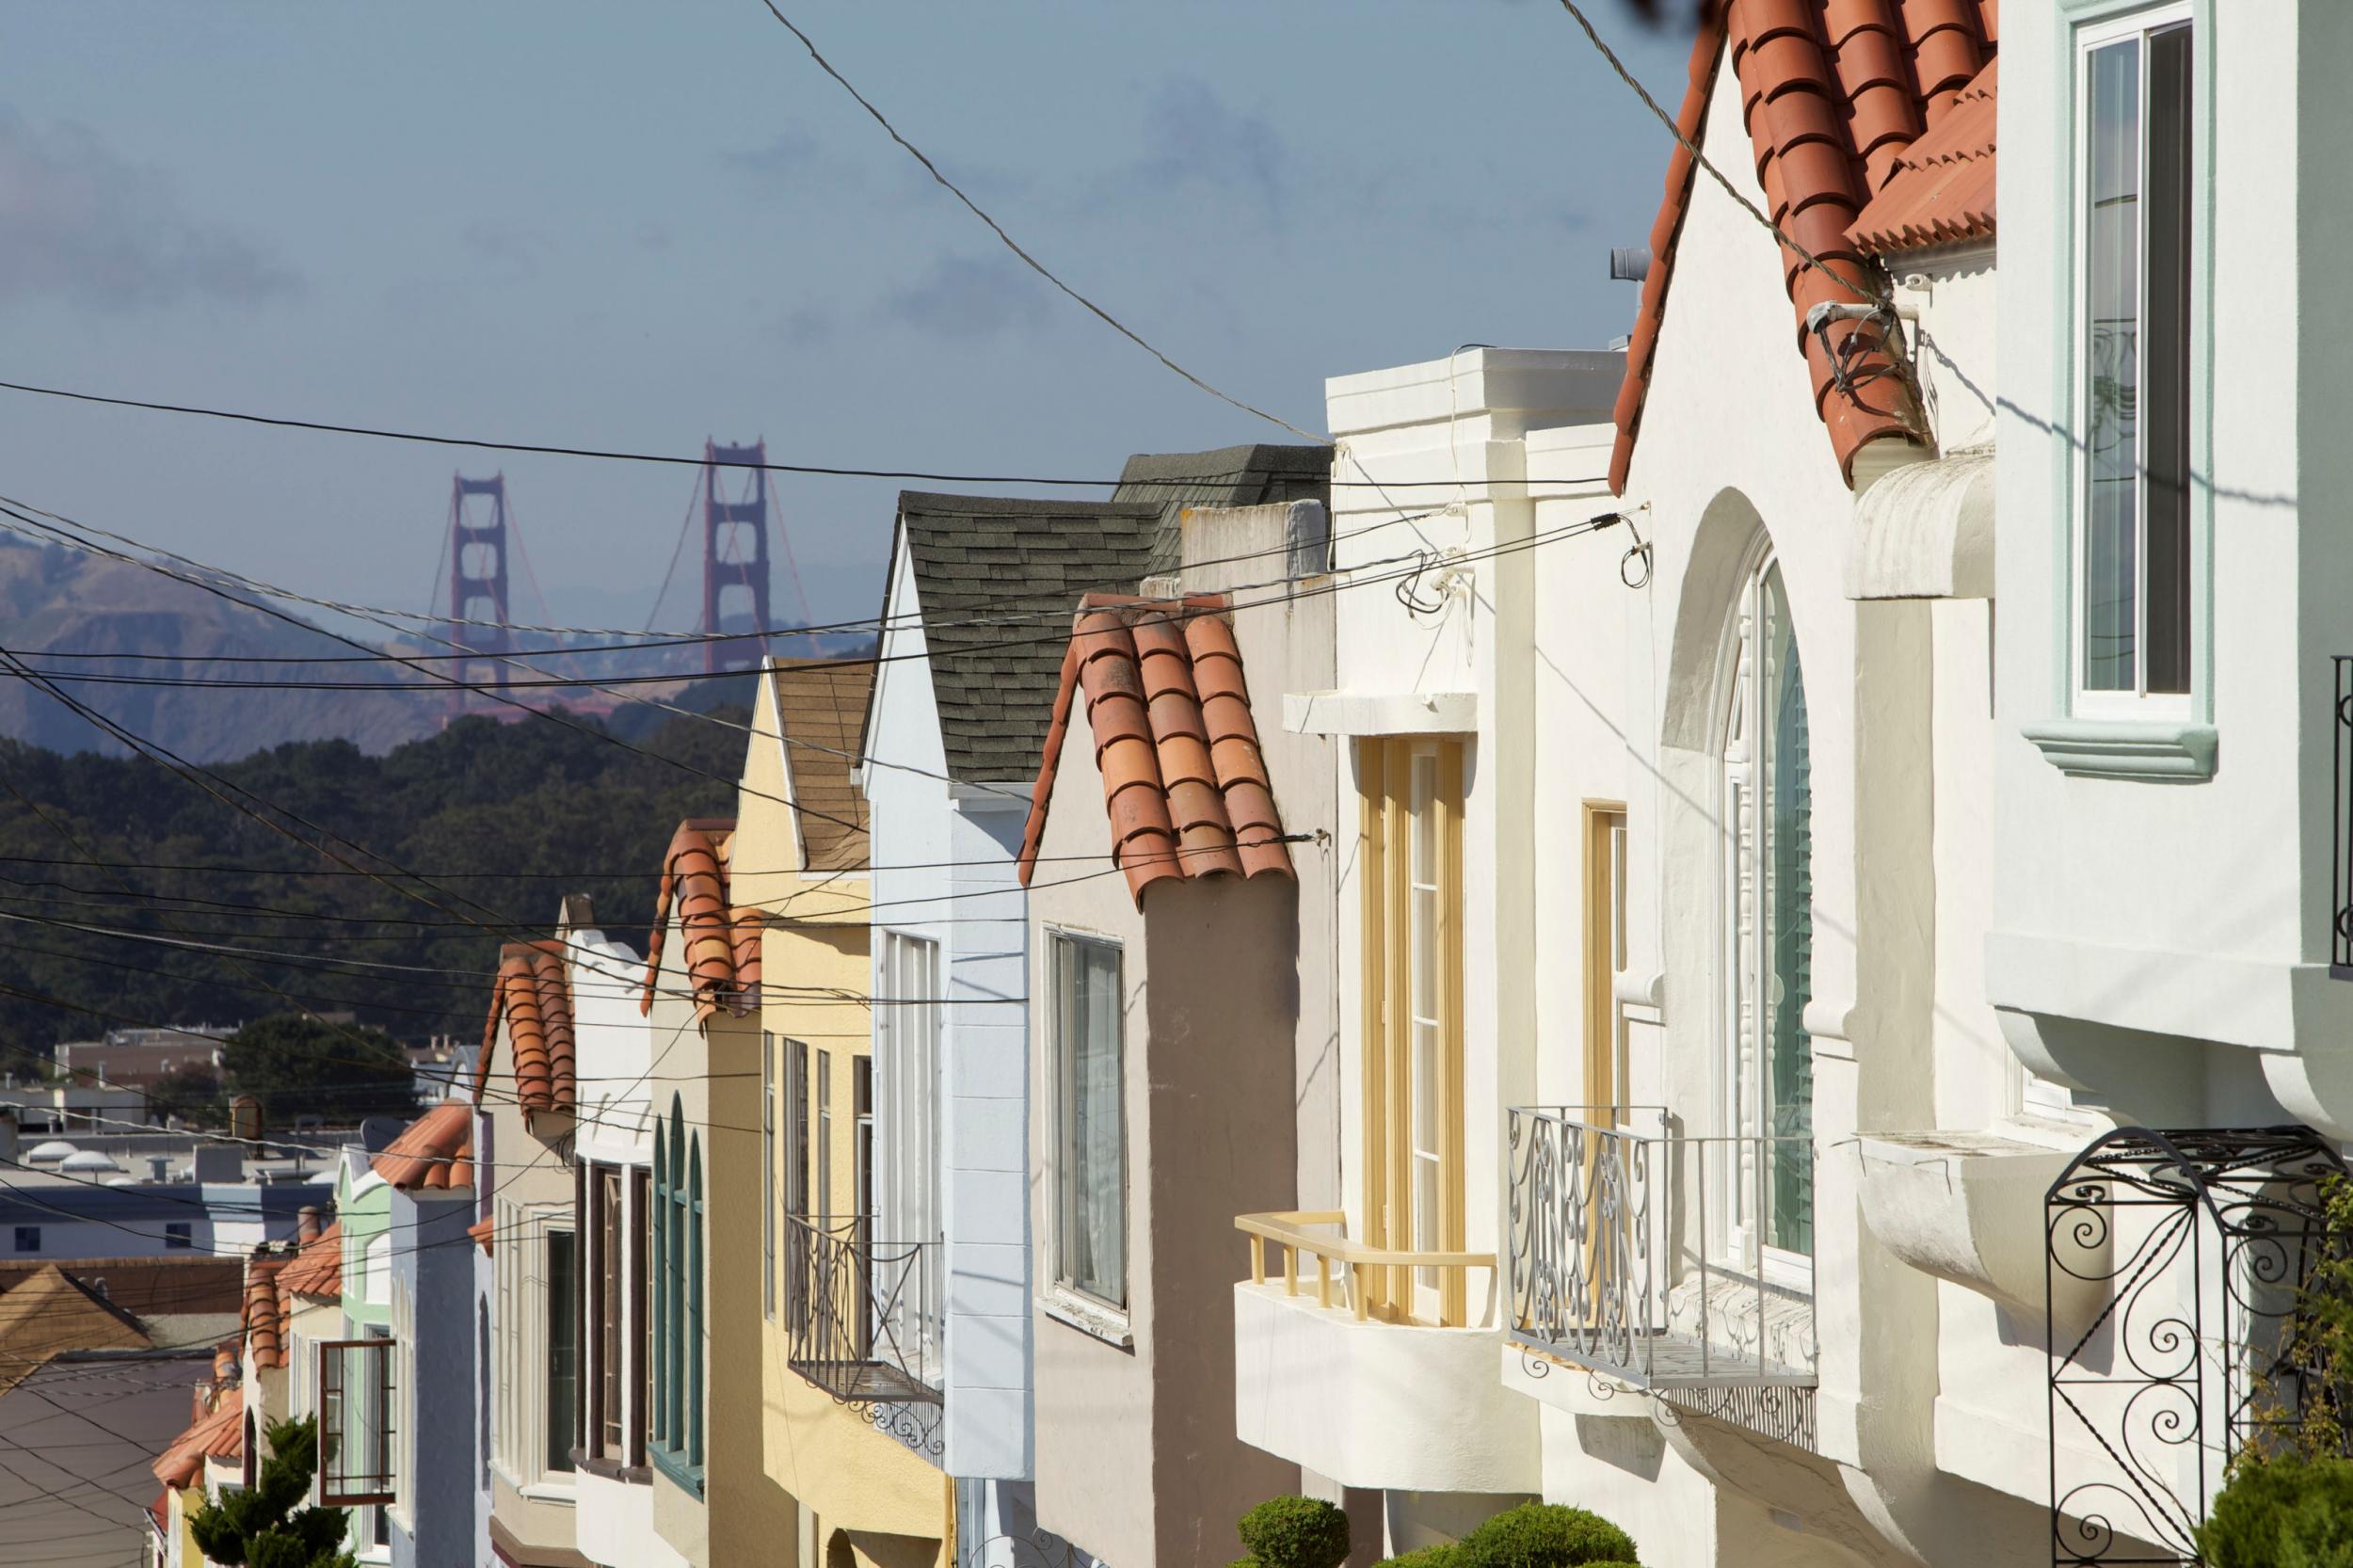 San Francisco’s recognisable sloping streets have been part of many blockbuster movies